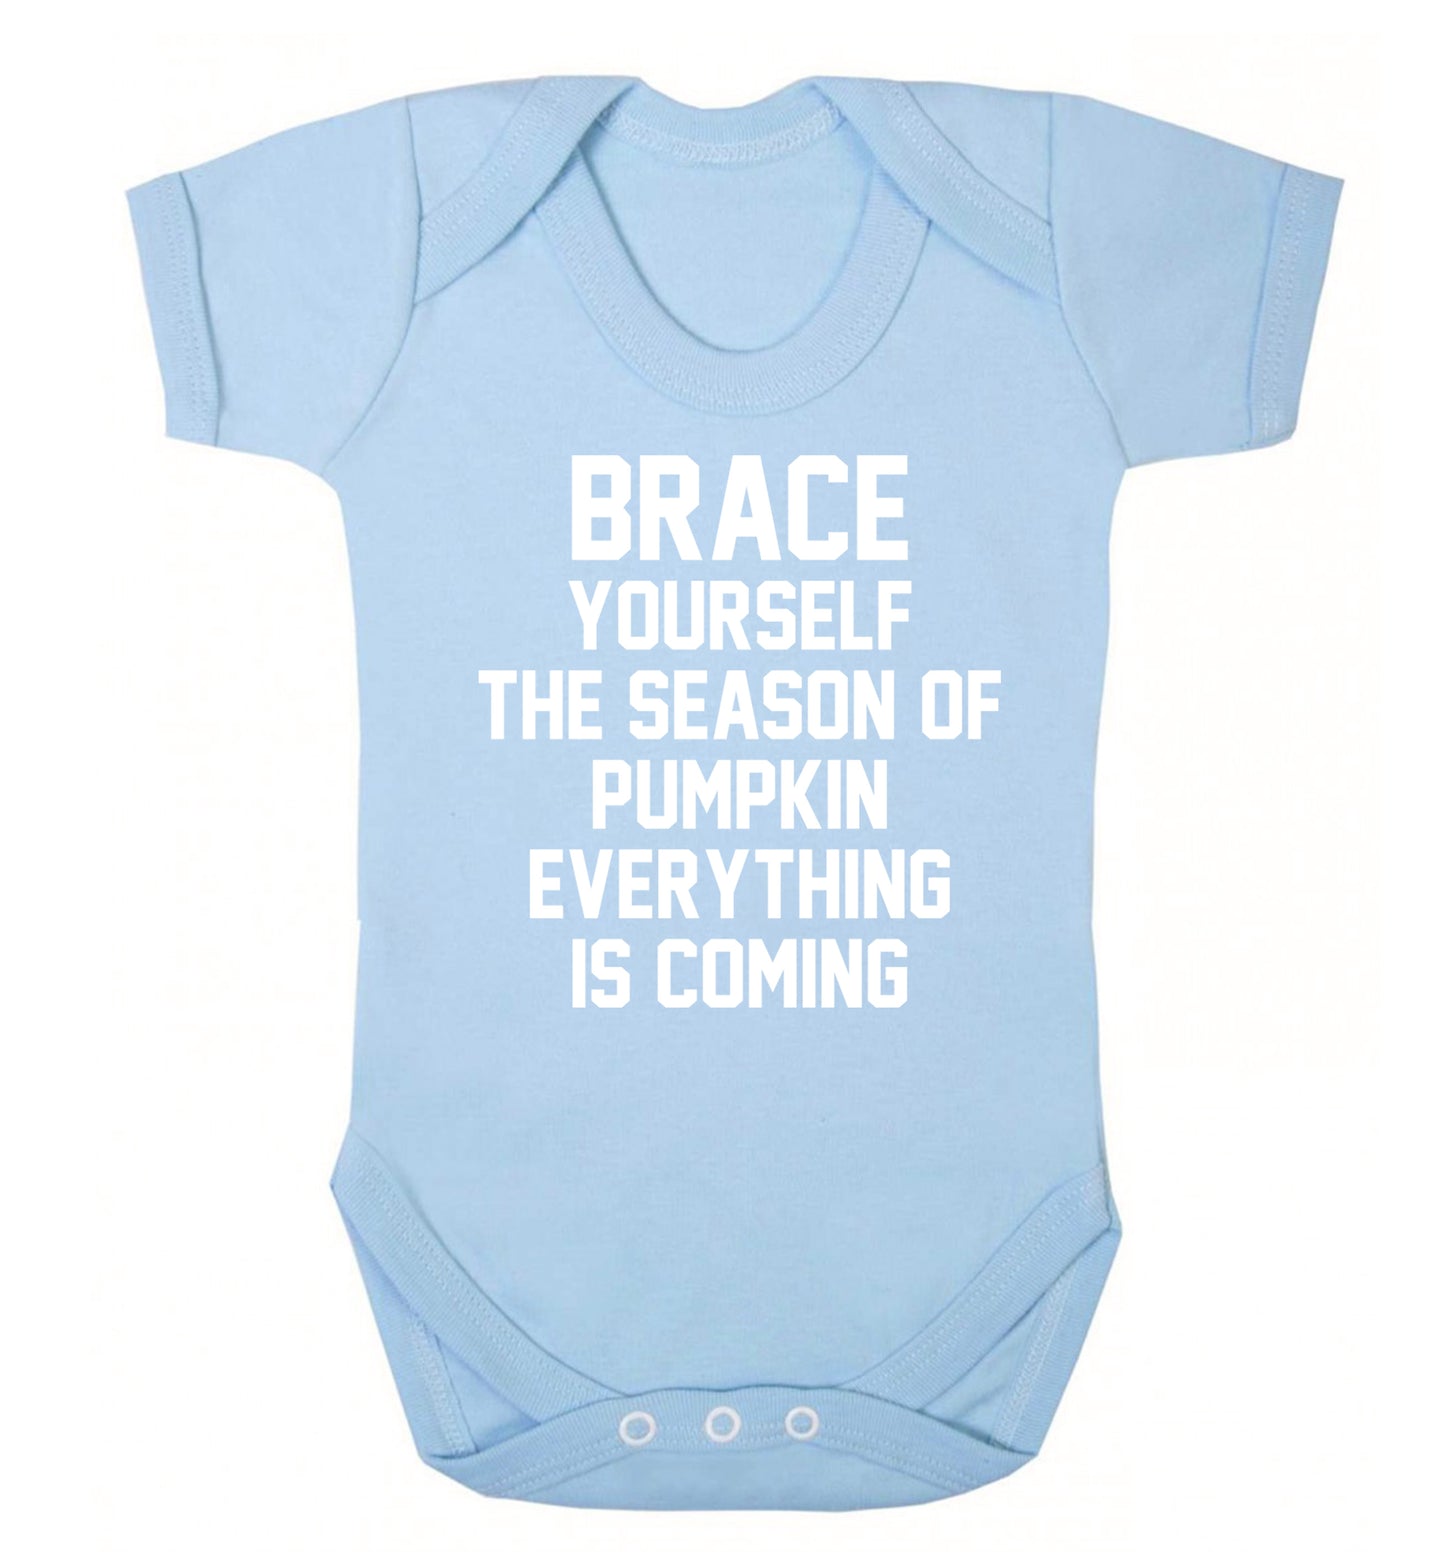 Brace yourself the season of pumpkin everything is coming Baby Vest pale blue 18-24 months